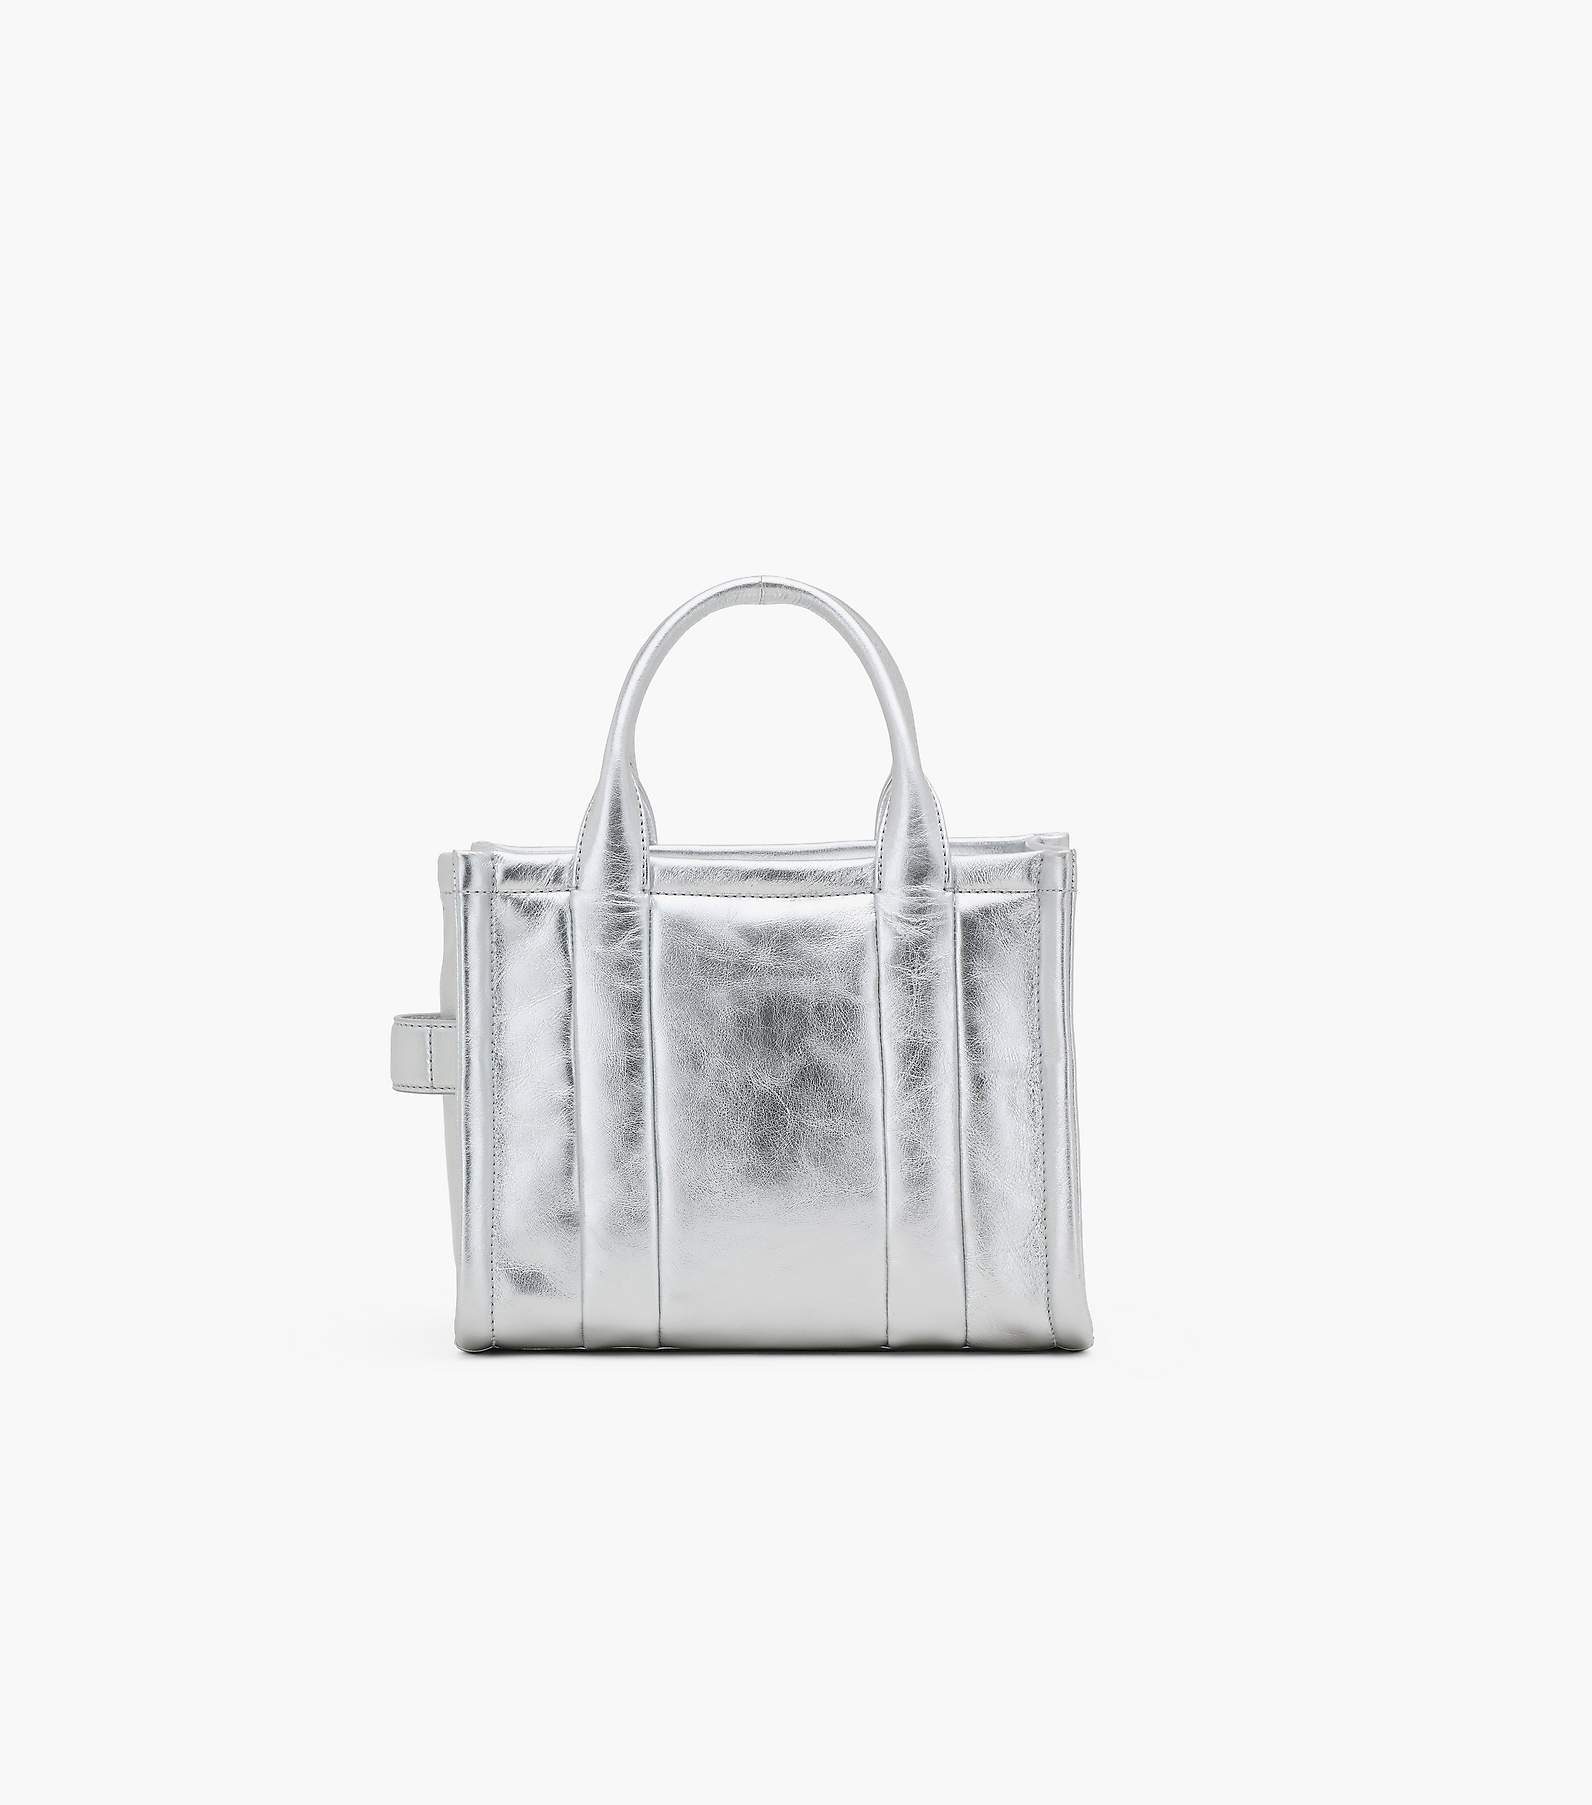 MARC JACOBS Shopper THE MEDIUM TOTE BAG LEATHER in white